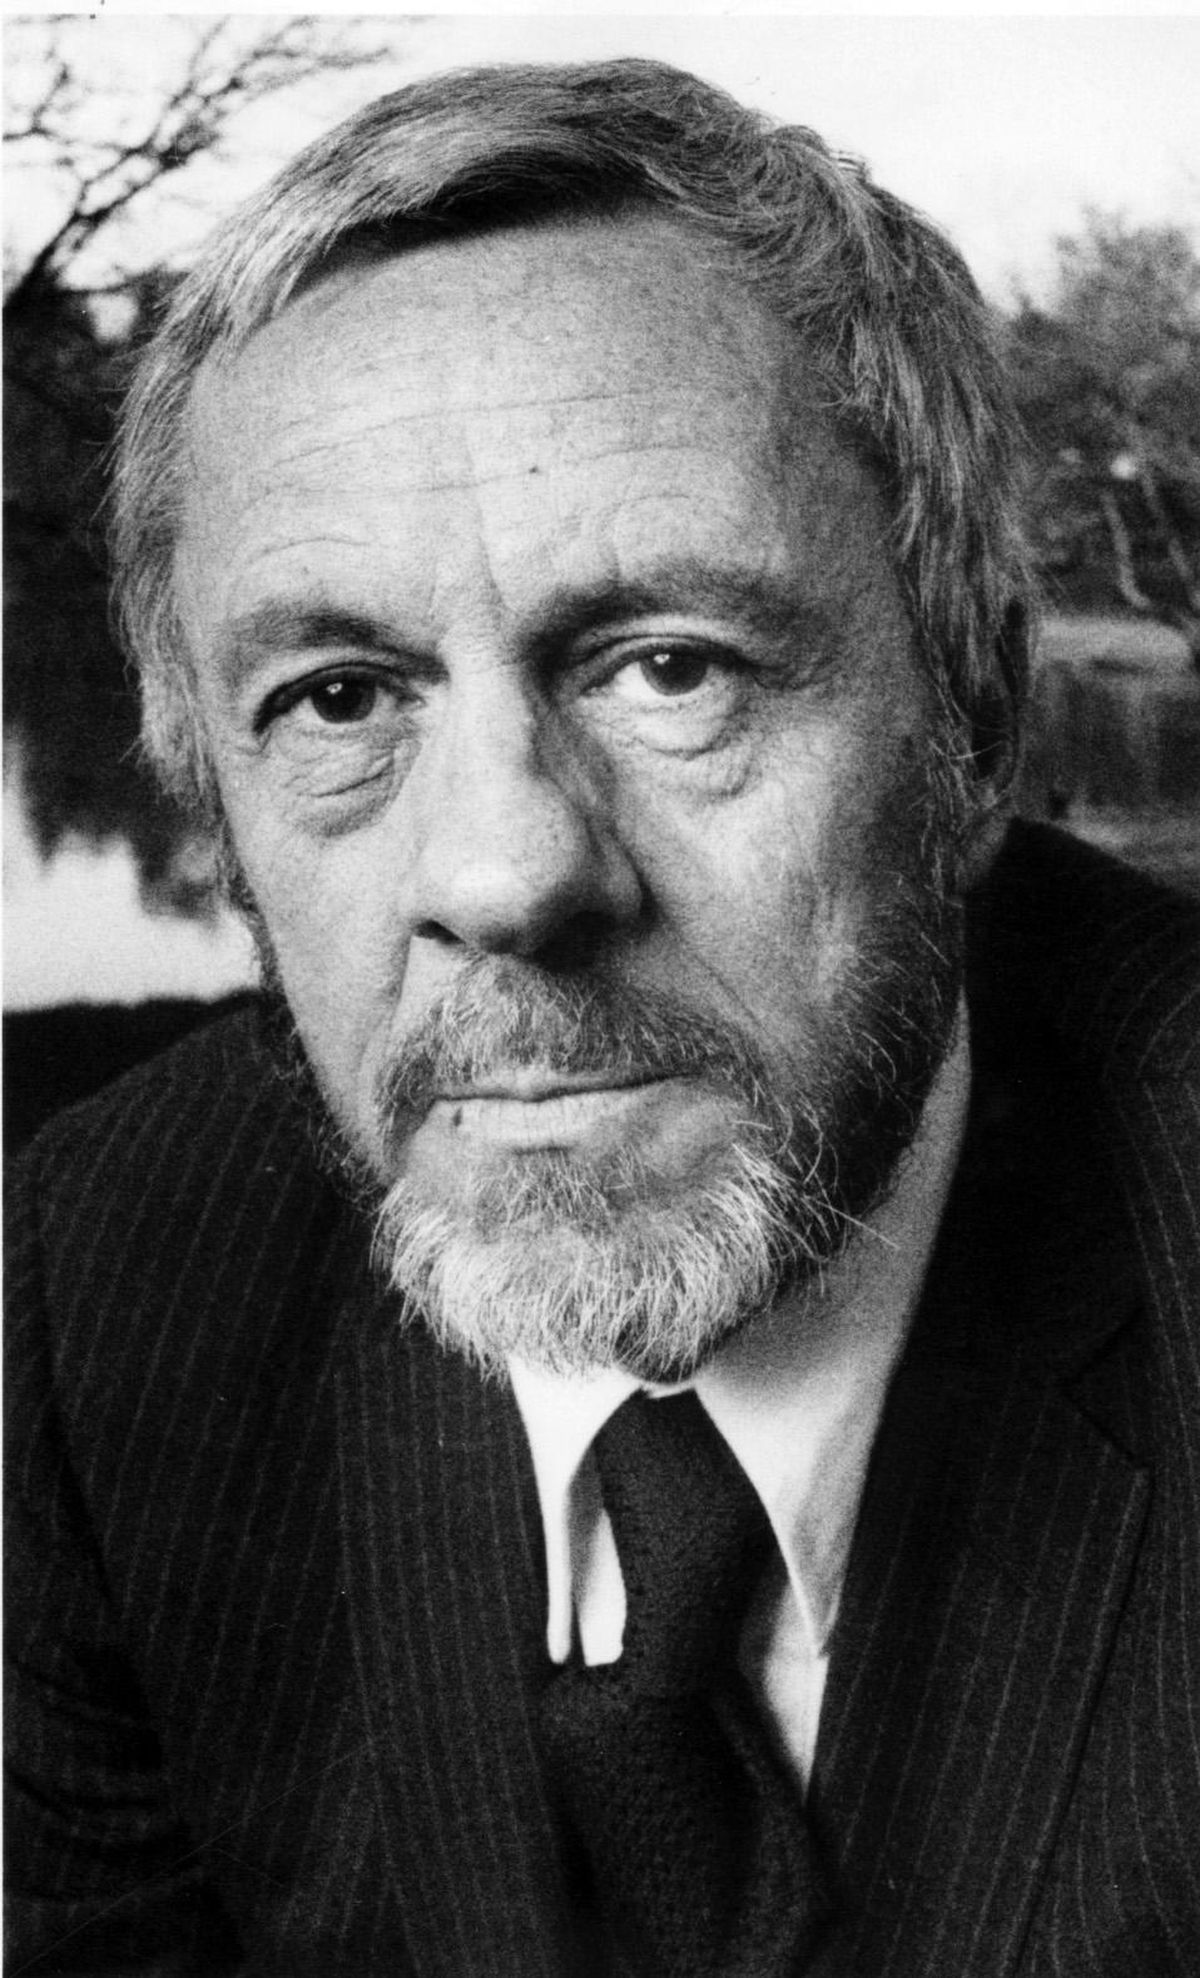 Jack Olsen, author, in 1984. Photo Archive/Spokesman-Review (<!-- No photographer provided --> / SPOKANE DAILY CHRONICLE)